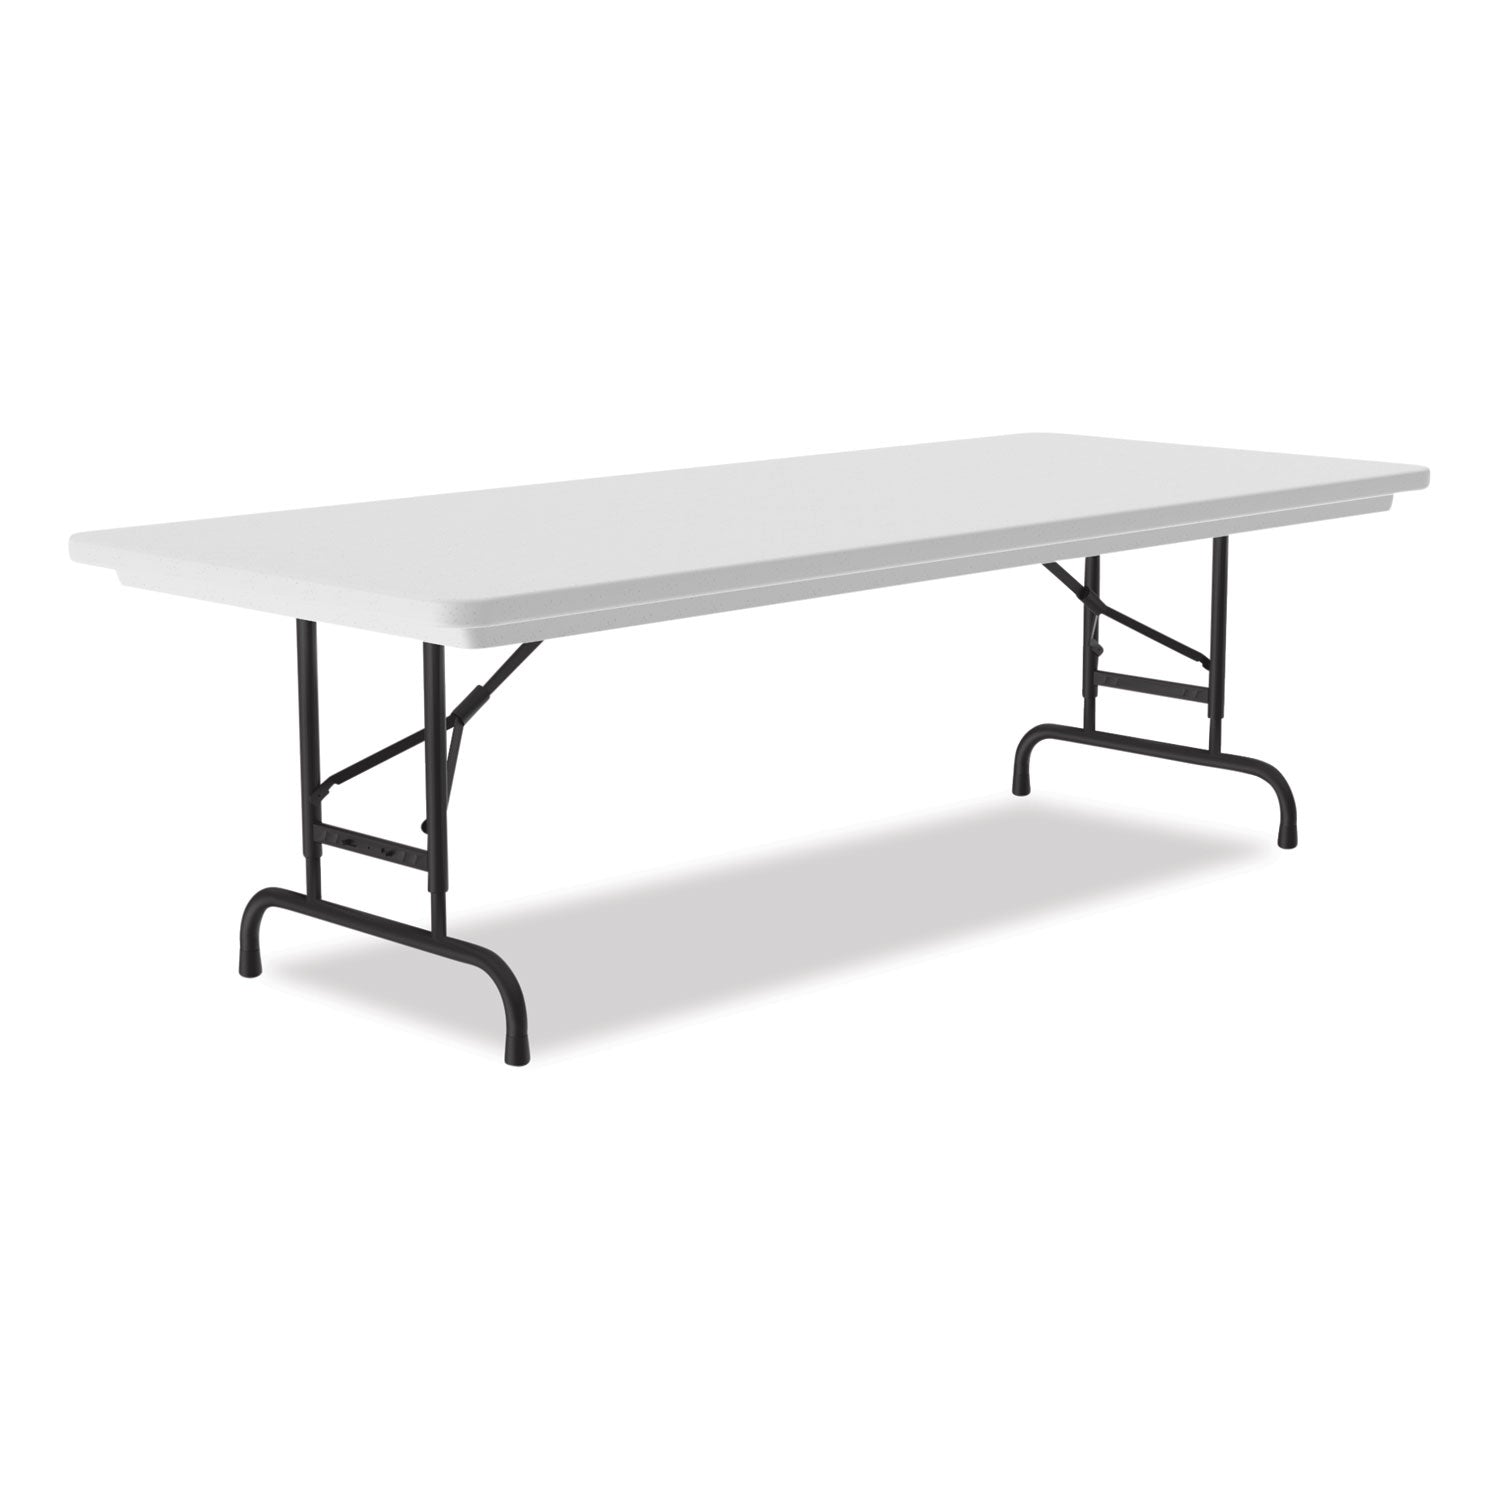 adjustable-folding-tables-rectangular-60-x-30-x-22-to-32-gray-top-black-legs-4-pallet-ships-in-4-6-business-days_crlra3060234p - 4